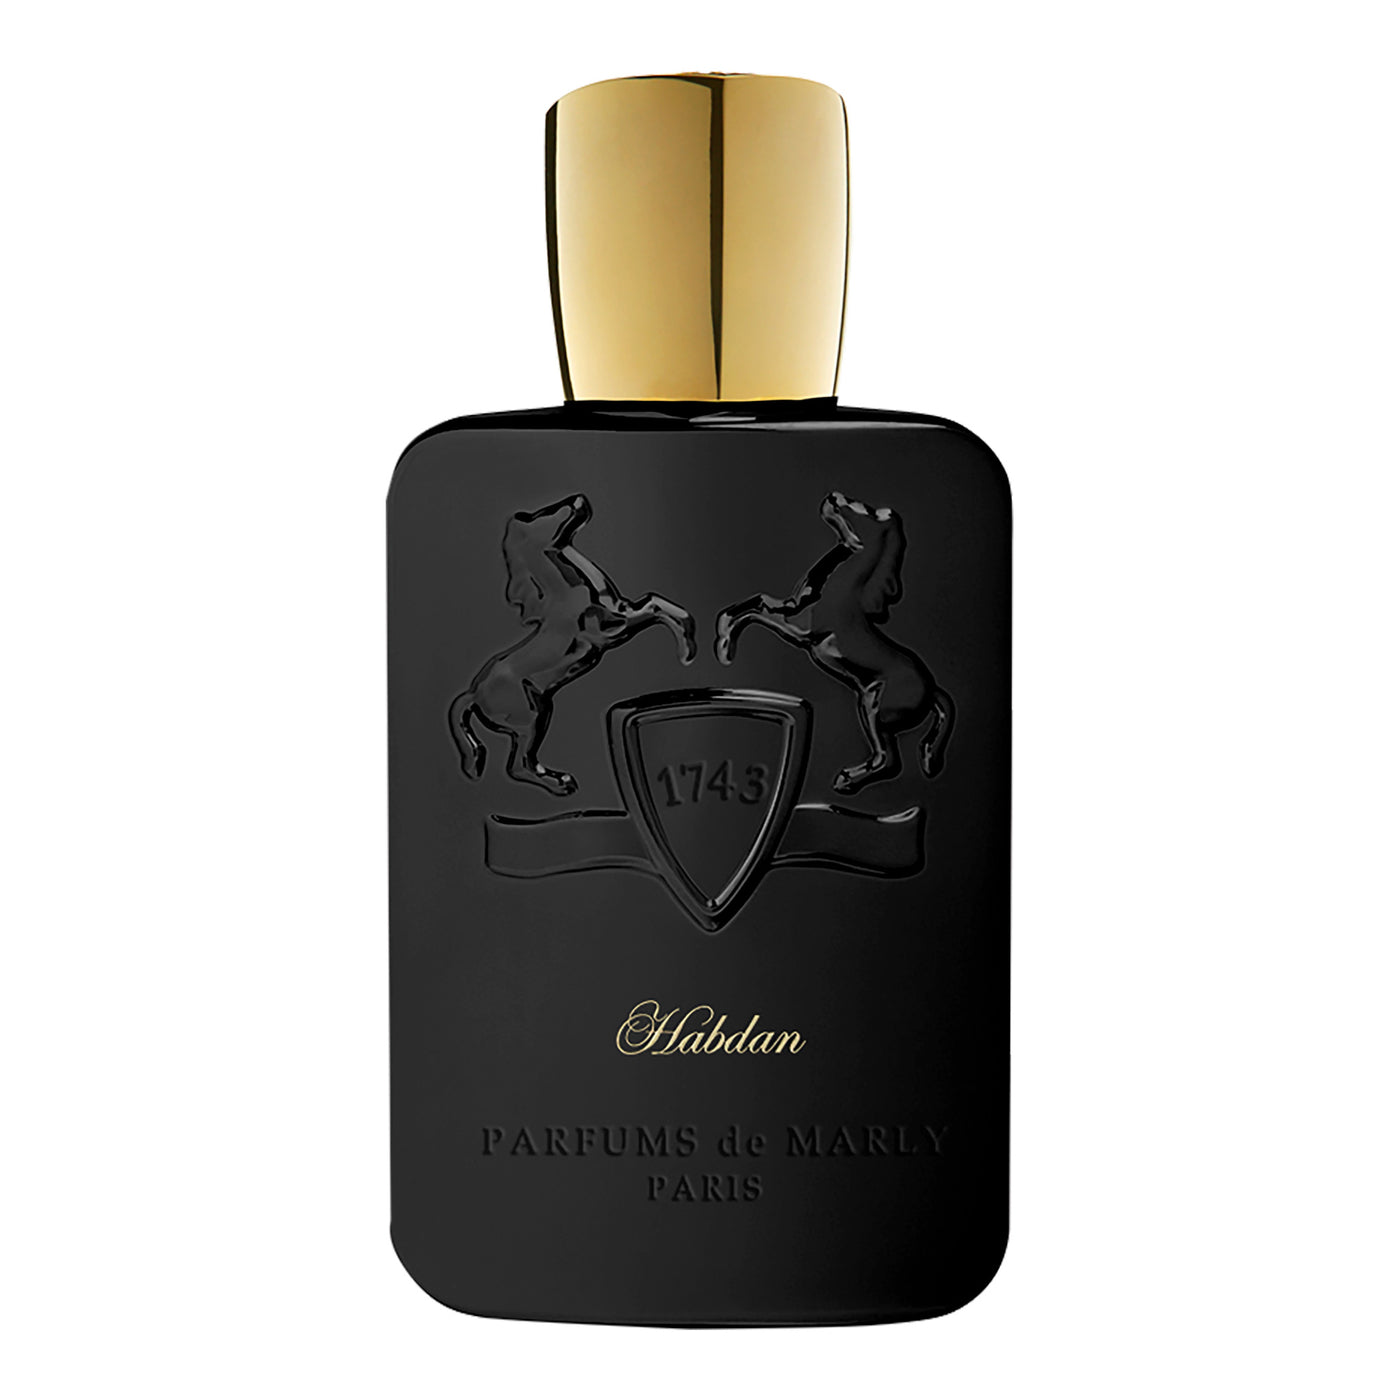 Parfums de Marly Habdan - 125ml - Gharyal by Collectibles 